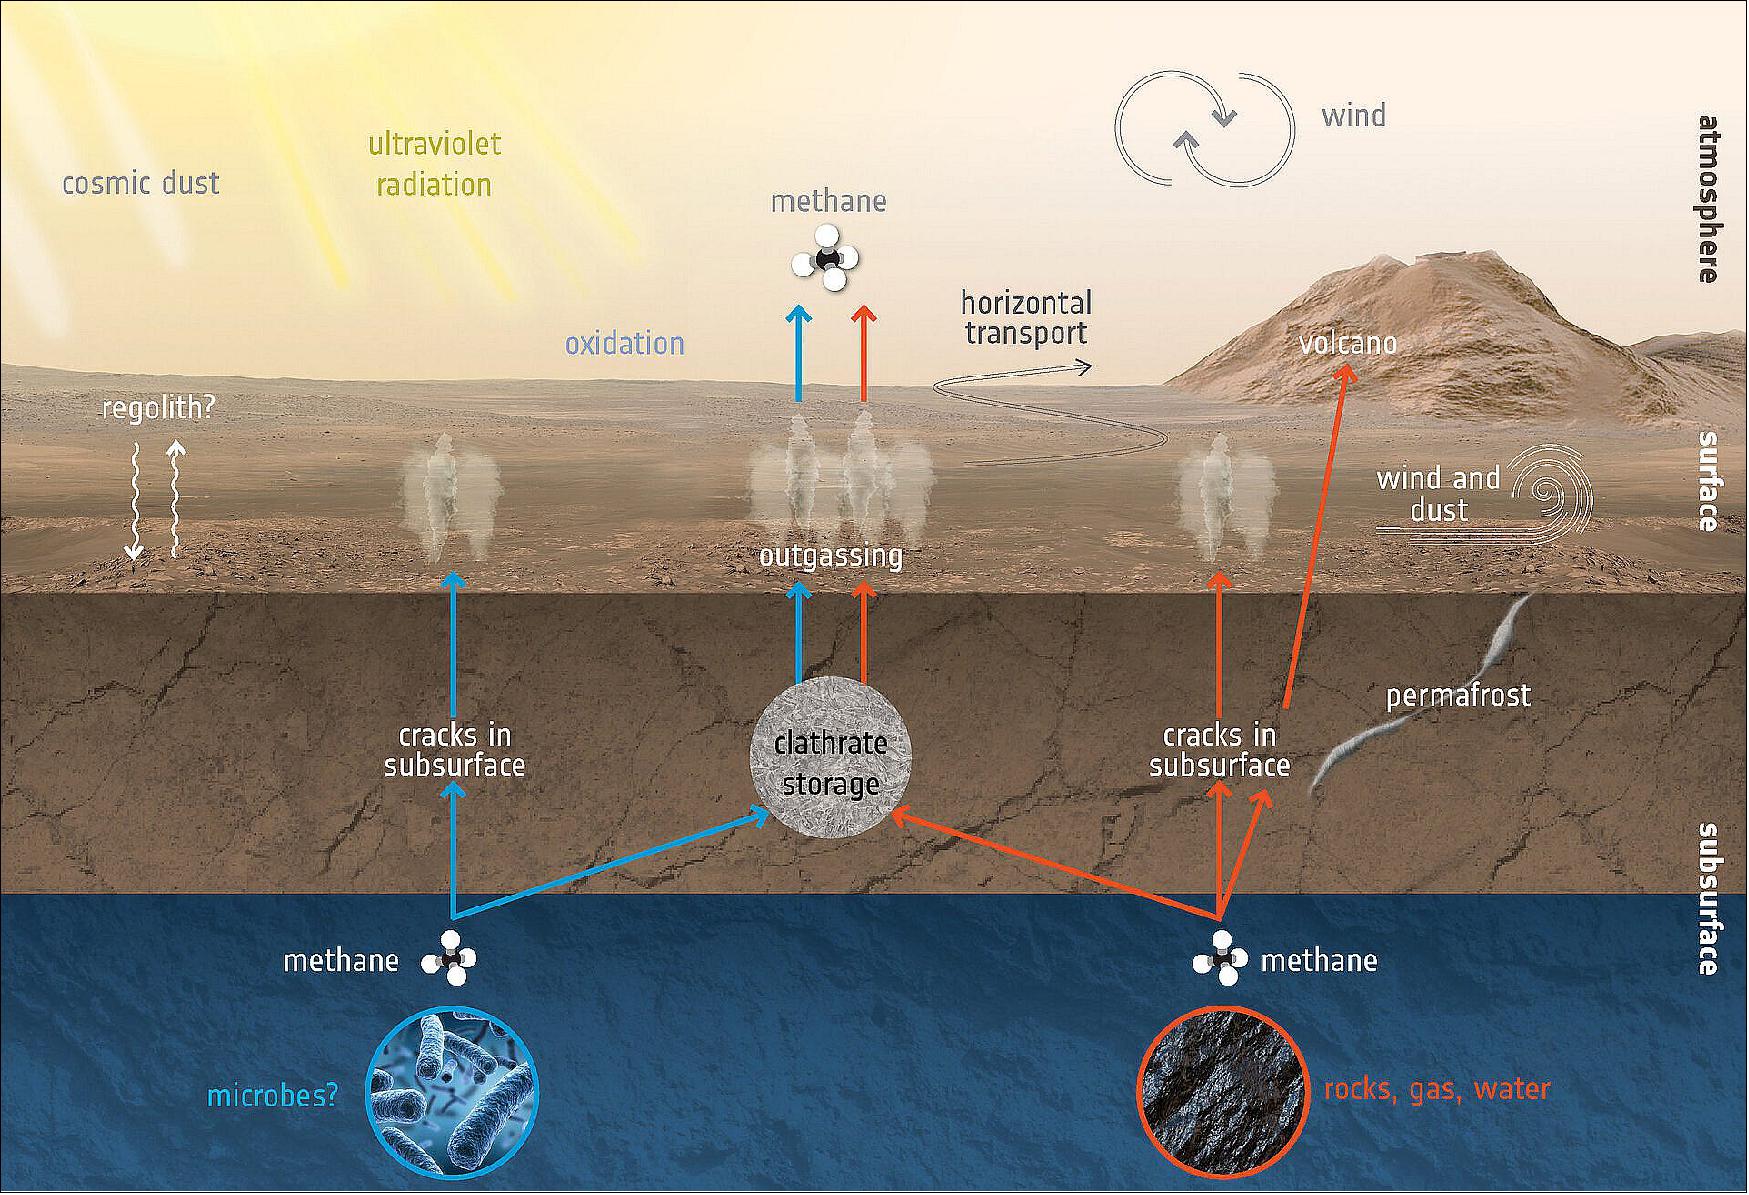 Figure 46: How methane is created and destroyed on Mars is an important question in understanding the various detections and non-detections of methane at Mars, with differences in both time and location. Although making up a very small amount of the overall atmospheric inventory, methane in particular holds key clues to the planet’s current state of activity. This graphic depicts some of the possible ways methane might be added or removed from the atmosphere. One exciting possibility is that methane is generated by microbes. If buried underground, this gas could be stored in lattice-structured ice formations known as clathrates, and released to the atmosphere at a much later time (image credit: ESA)